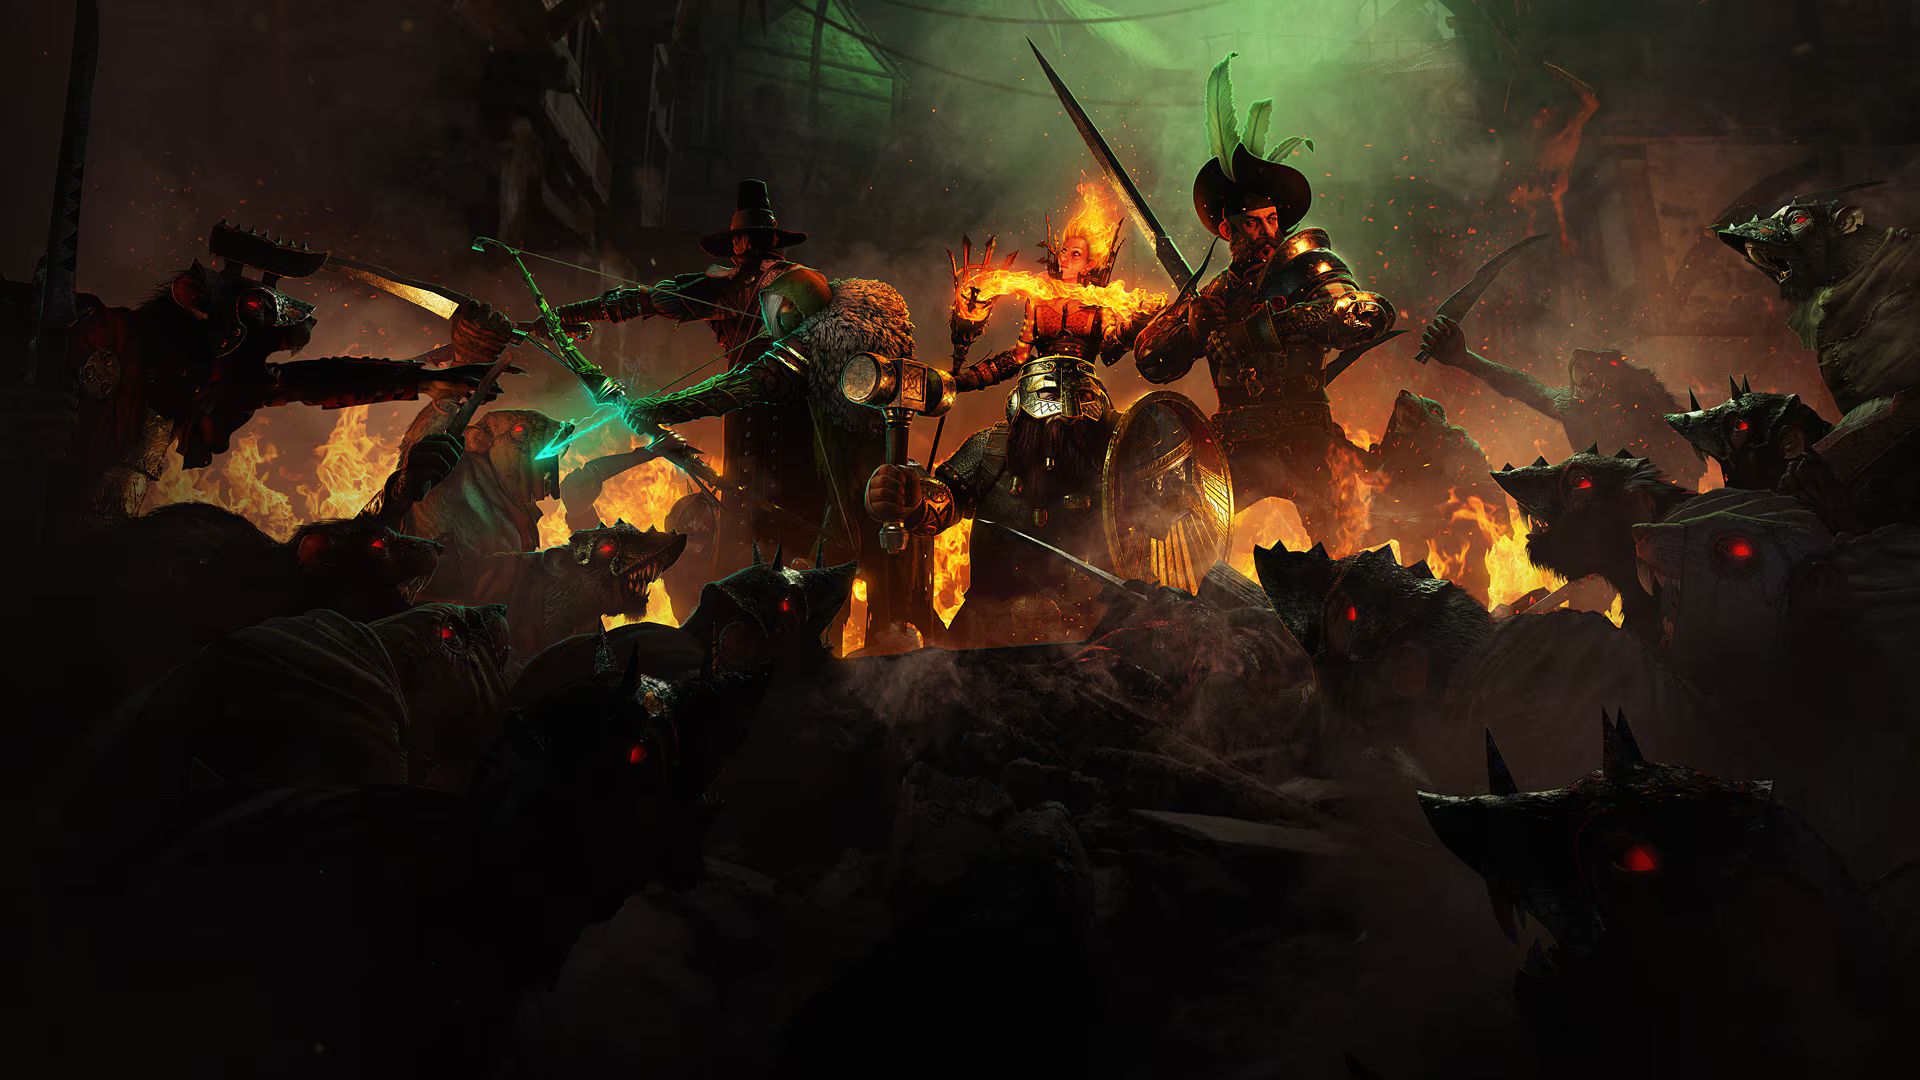 Warhammer: The End Times: Vermintide